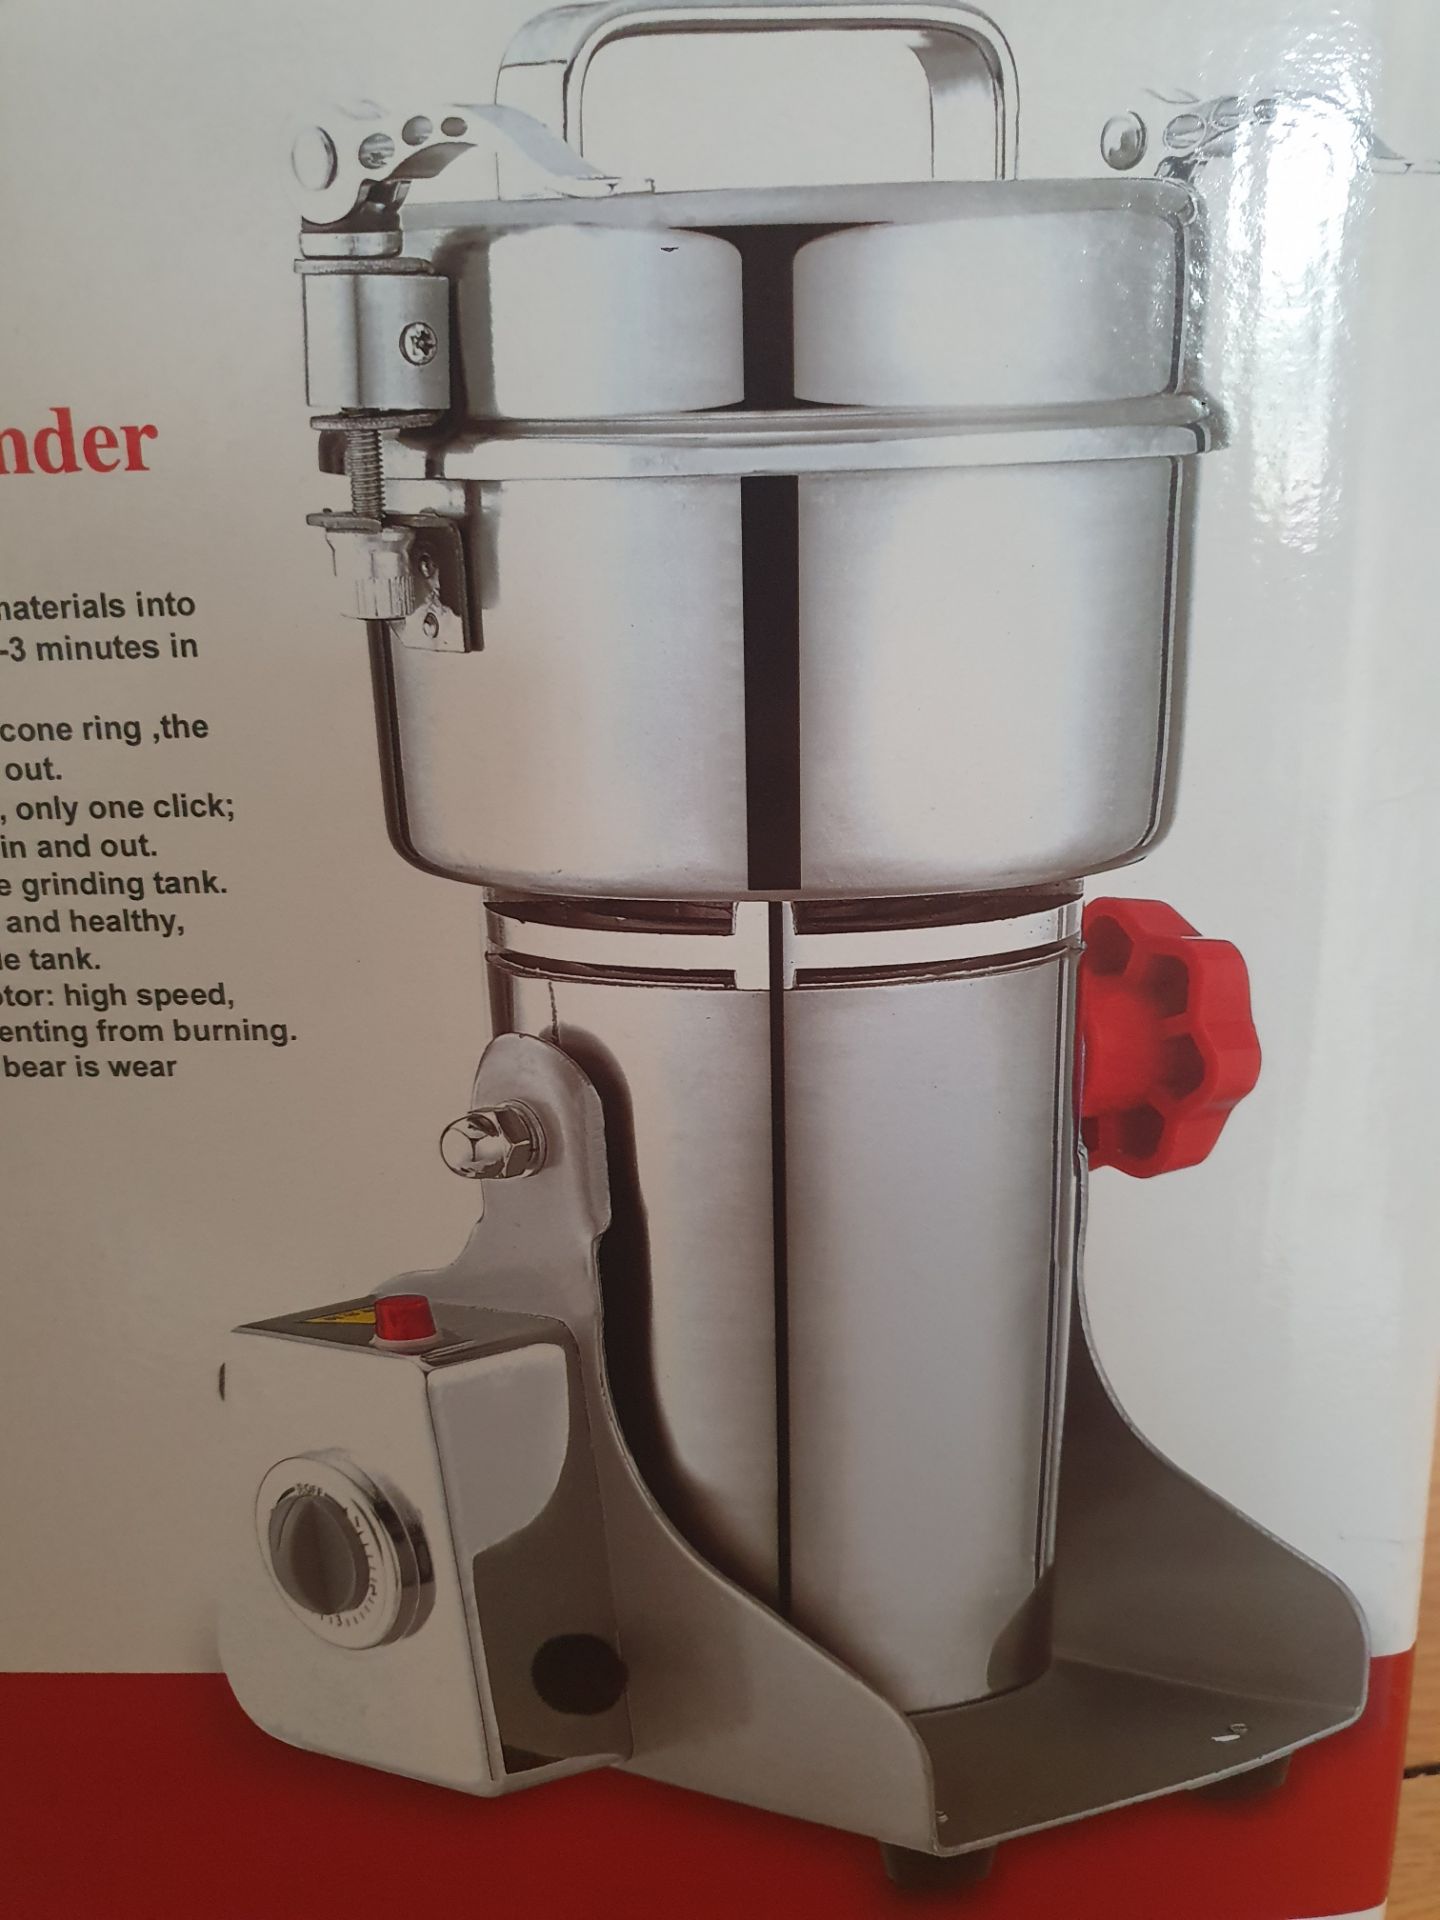 A Large Grinder That Is Ideal For Nuts, Spices, Herbs and Even Coffee. - Image 3 of 8